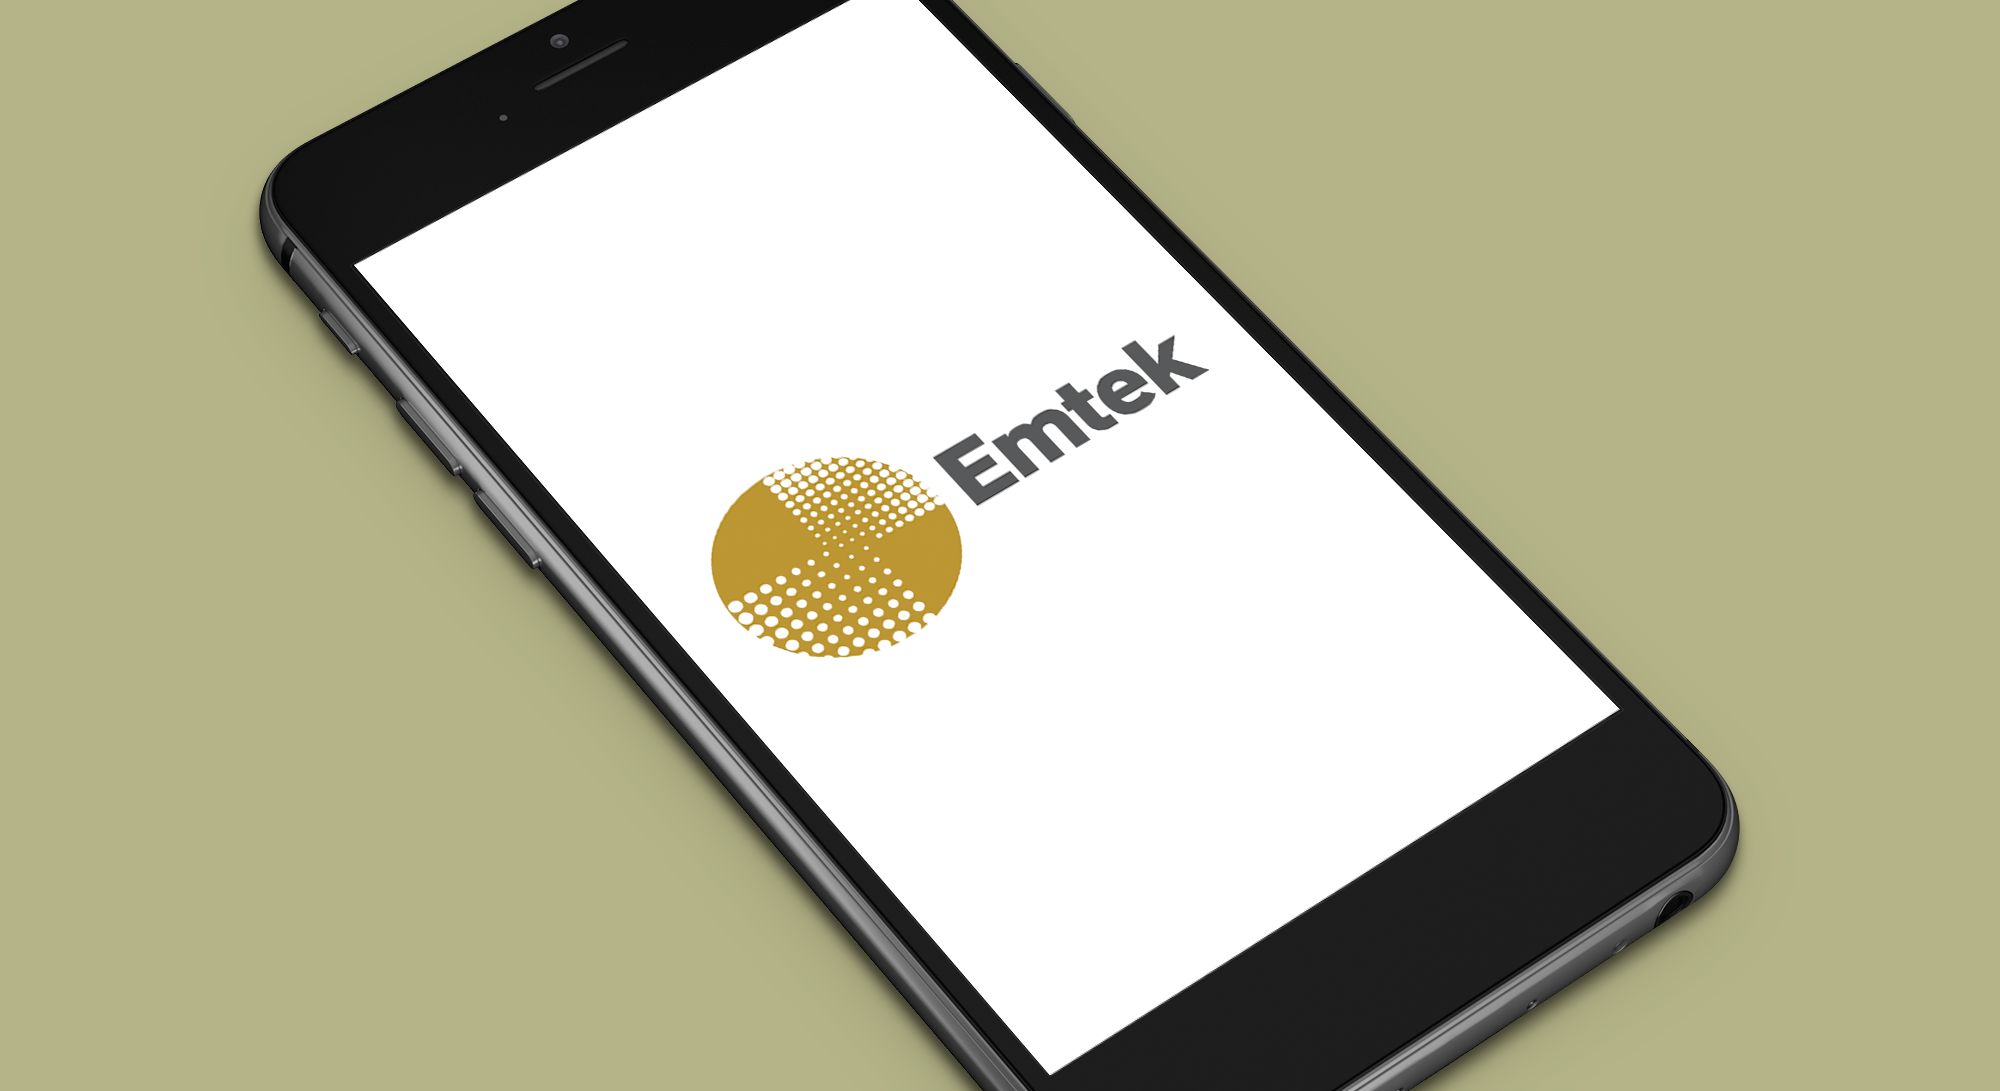 Emtek plans to list Superbank, Vidio and RANS, but it won't be possible in the near term